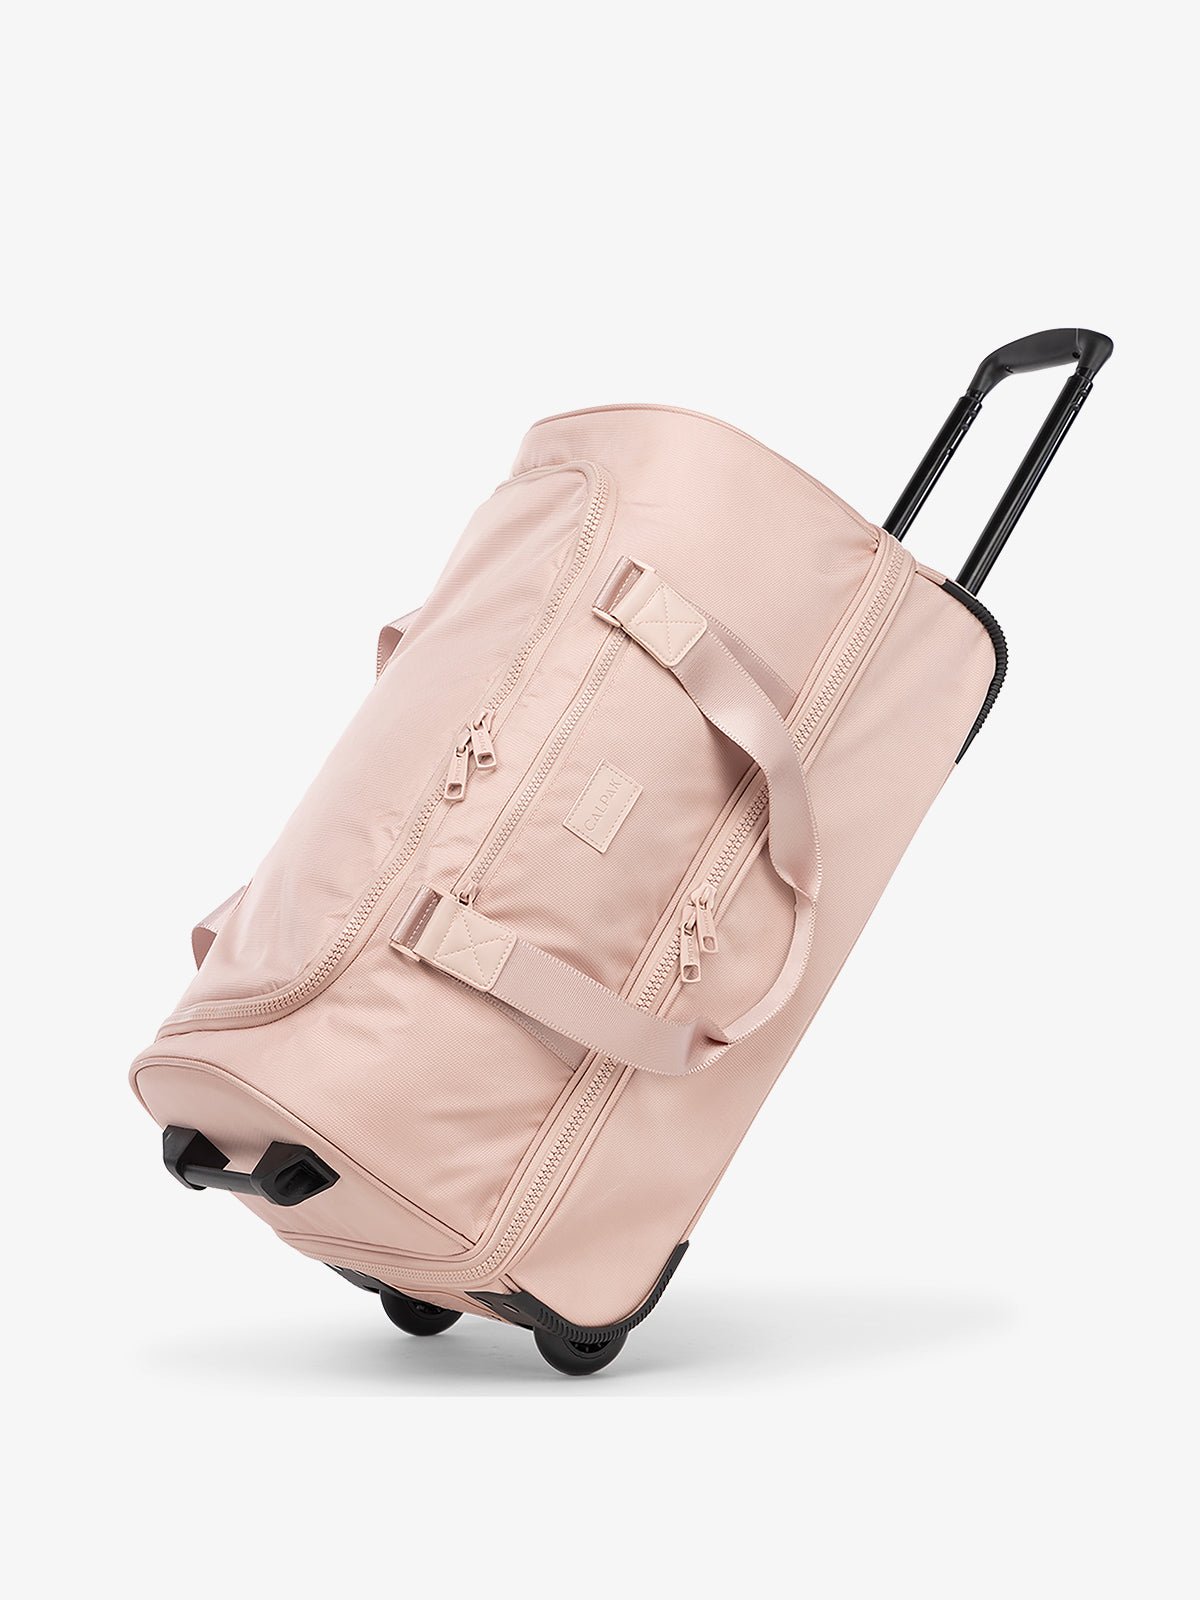 CALPAK Stevyn Rolling Duffel side view with top handle extended in pink sand